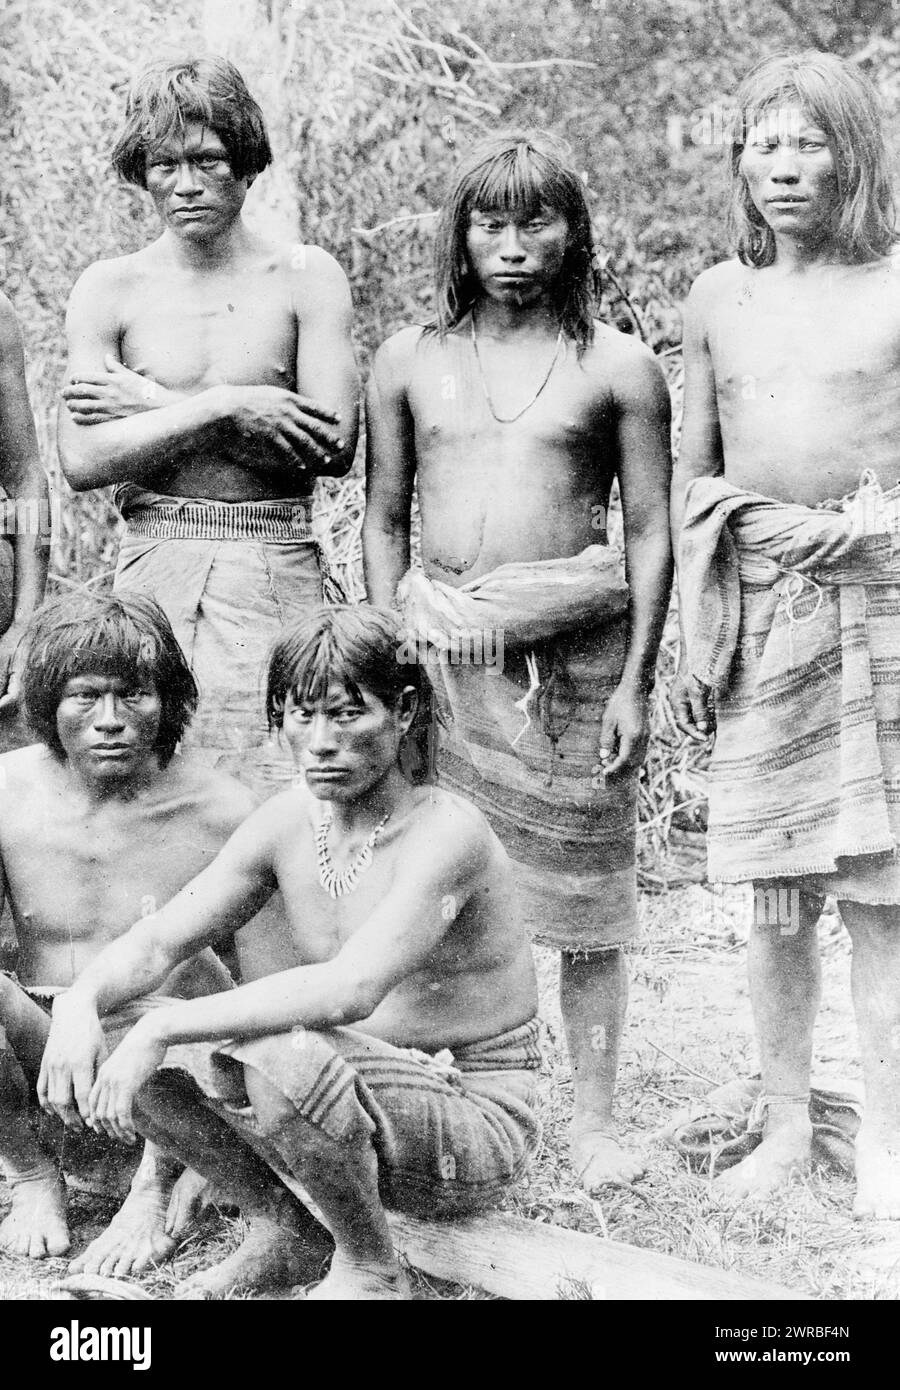 Group of head hunters of the upper Amazon, in Brazil, Carpenter, Frank G. (Frank George), 1855-1924, collector, between 1890 and 1923, Men, Clothing & dress, Amazon River Region, 1890-1930, Group portraits, 1890-1930., Portrait photographs, 1890-1930, Group portraits, 1890-1930, 1 photographic print Stock Photo